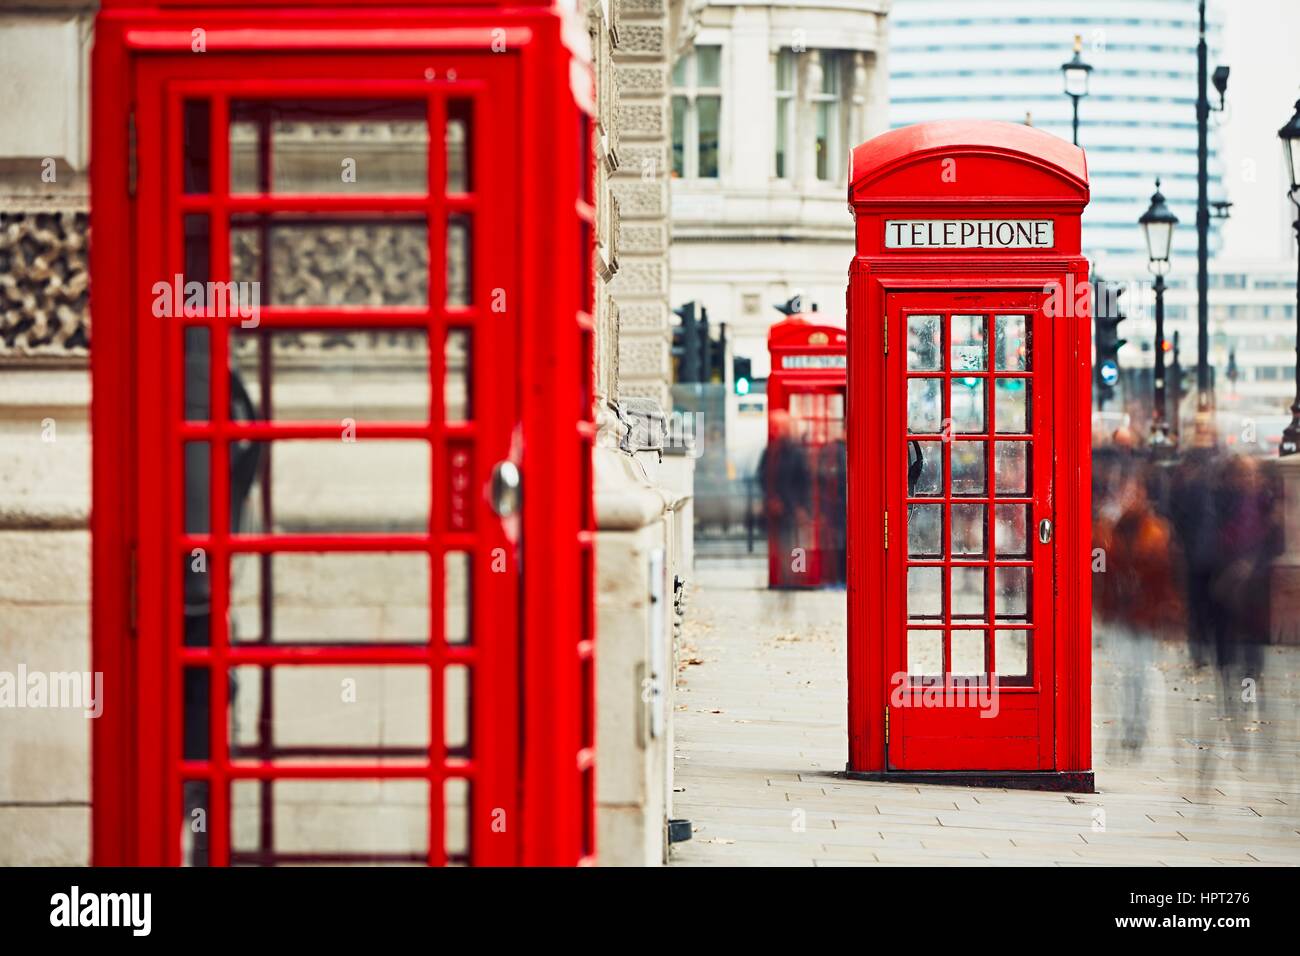 Crowd of people and red telephone boxes on the street in London, The United Kingdom of Great Britain and Northern Ireland Stock Photo